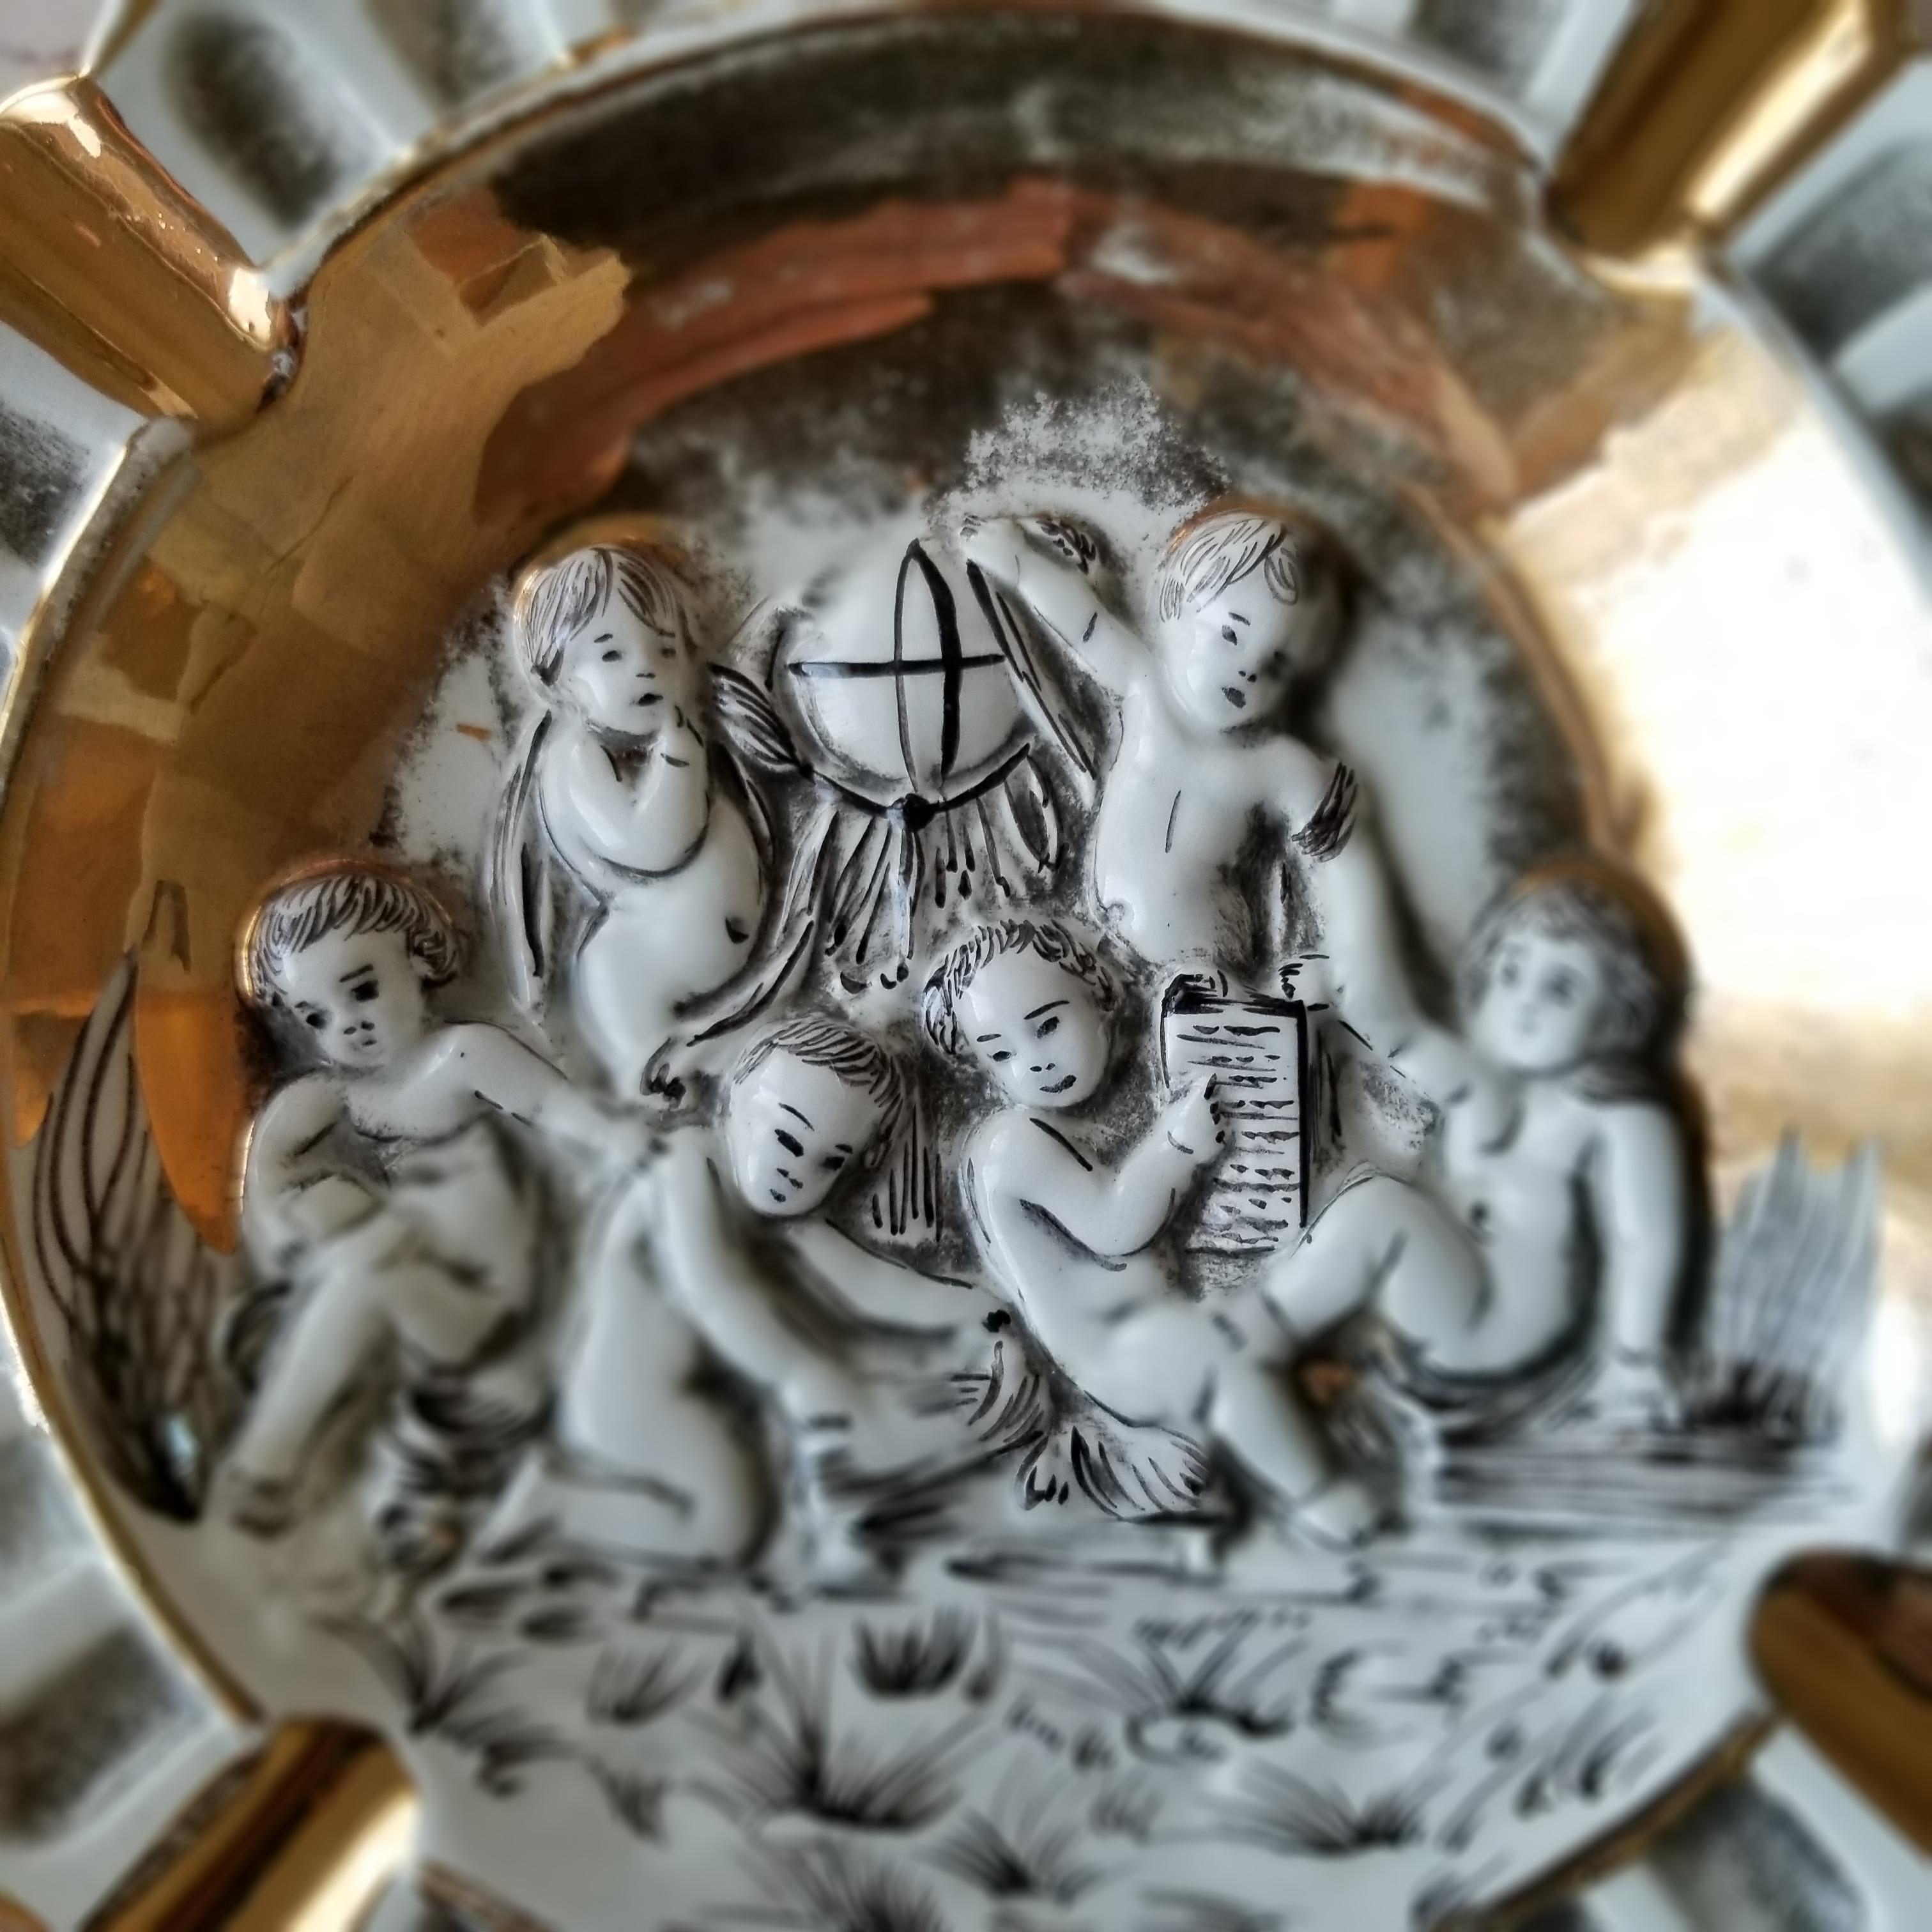 1960s Midcentury Modern Hollywood Regency Italian Gold Renaissance Cherub Ashtray 3.
Trimmed in 24kt Gold by Capodimonte signed stamped Italy.
7.5 x 7.5
Colors are Gold, Black and White.
Very good vintage condition. Lovely presentation.
